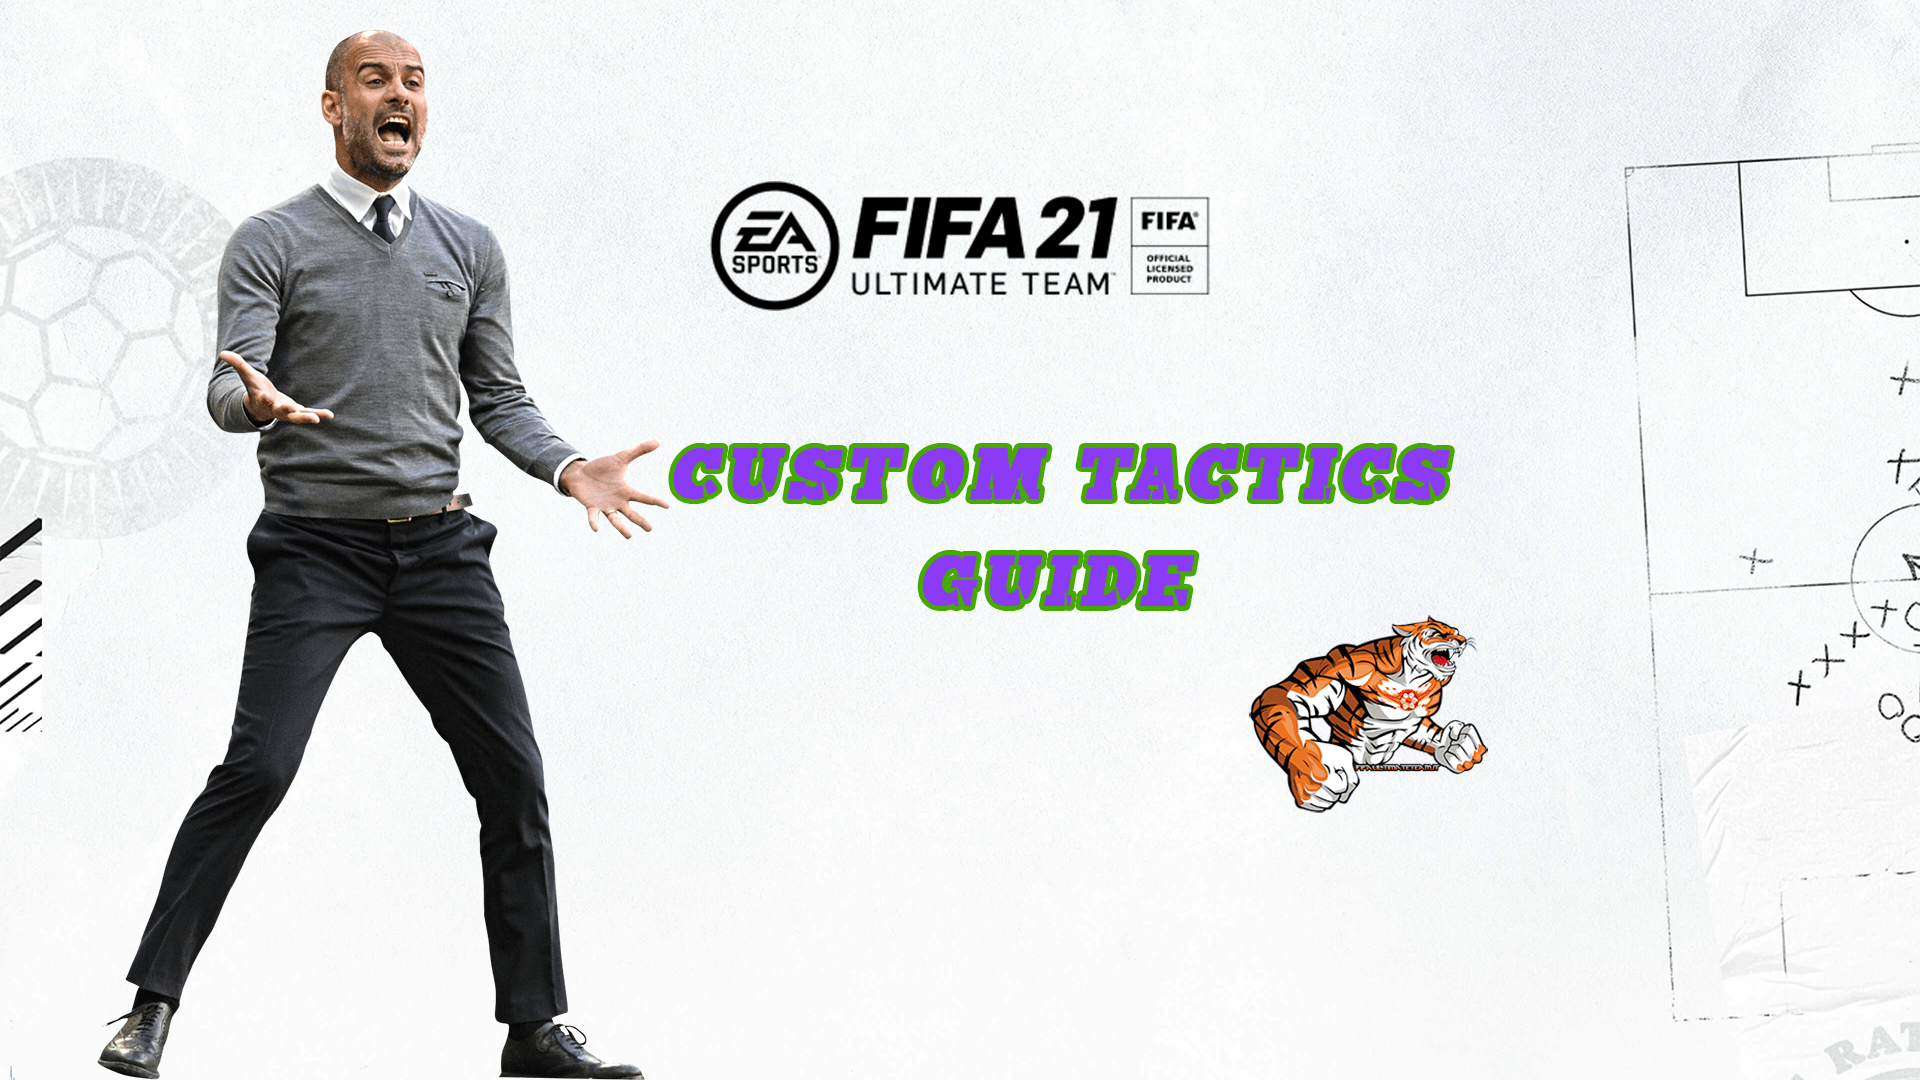 FIFA 21 The most used modules in FUT 21 – Custom Tactics Guide and